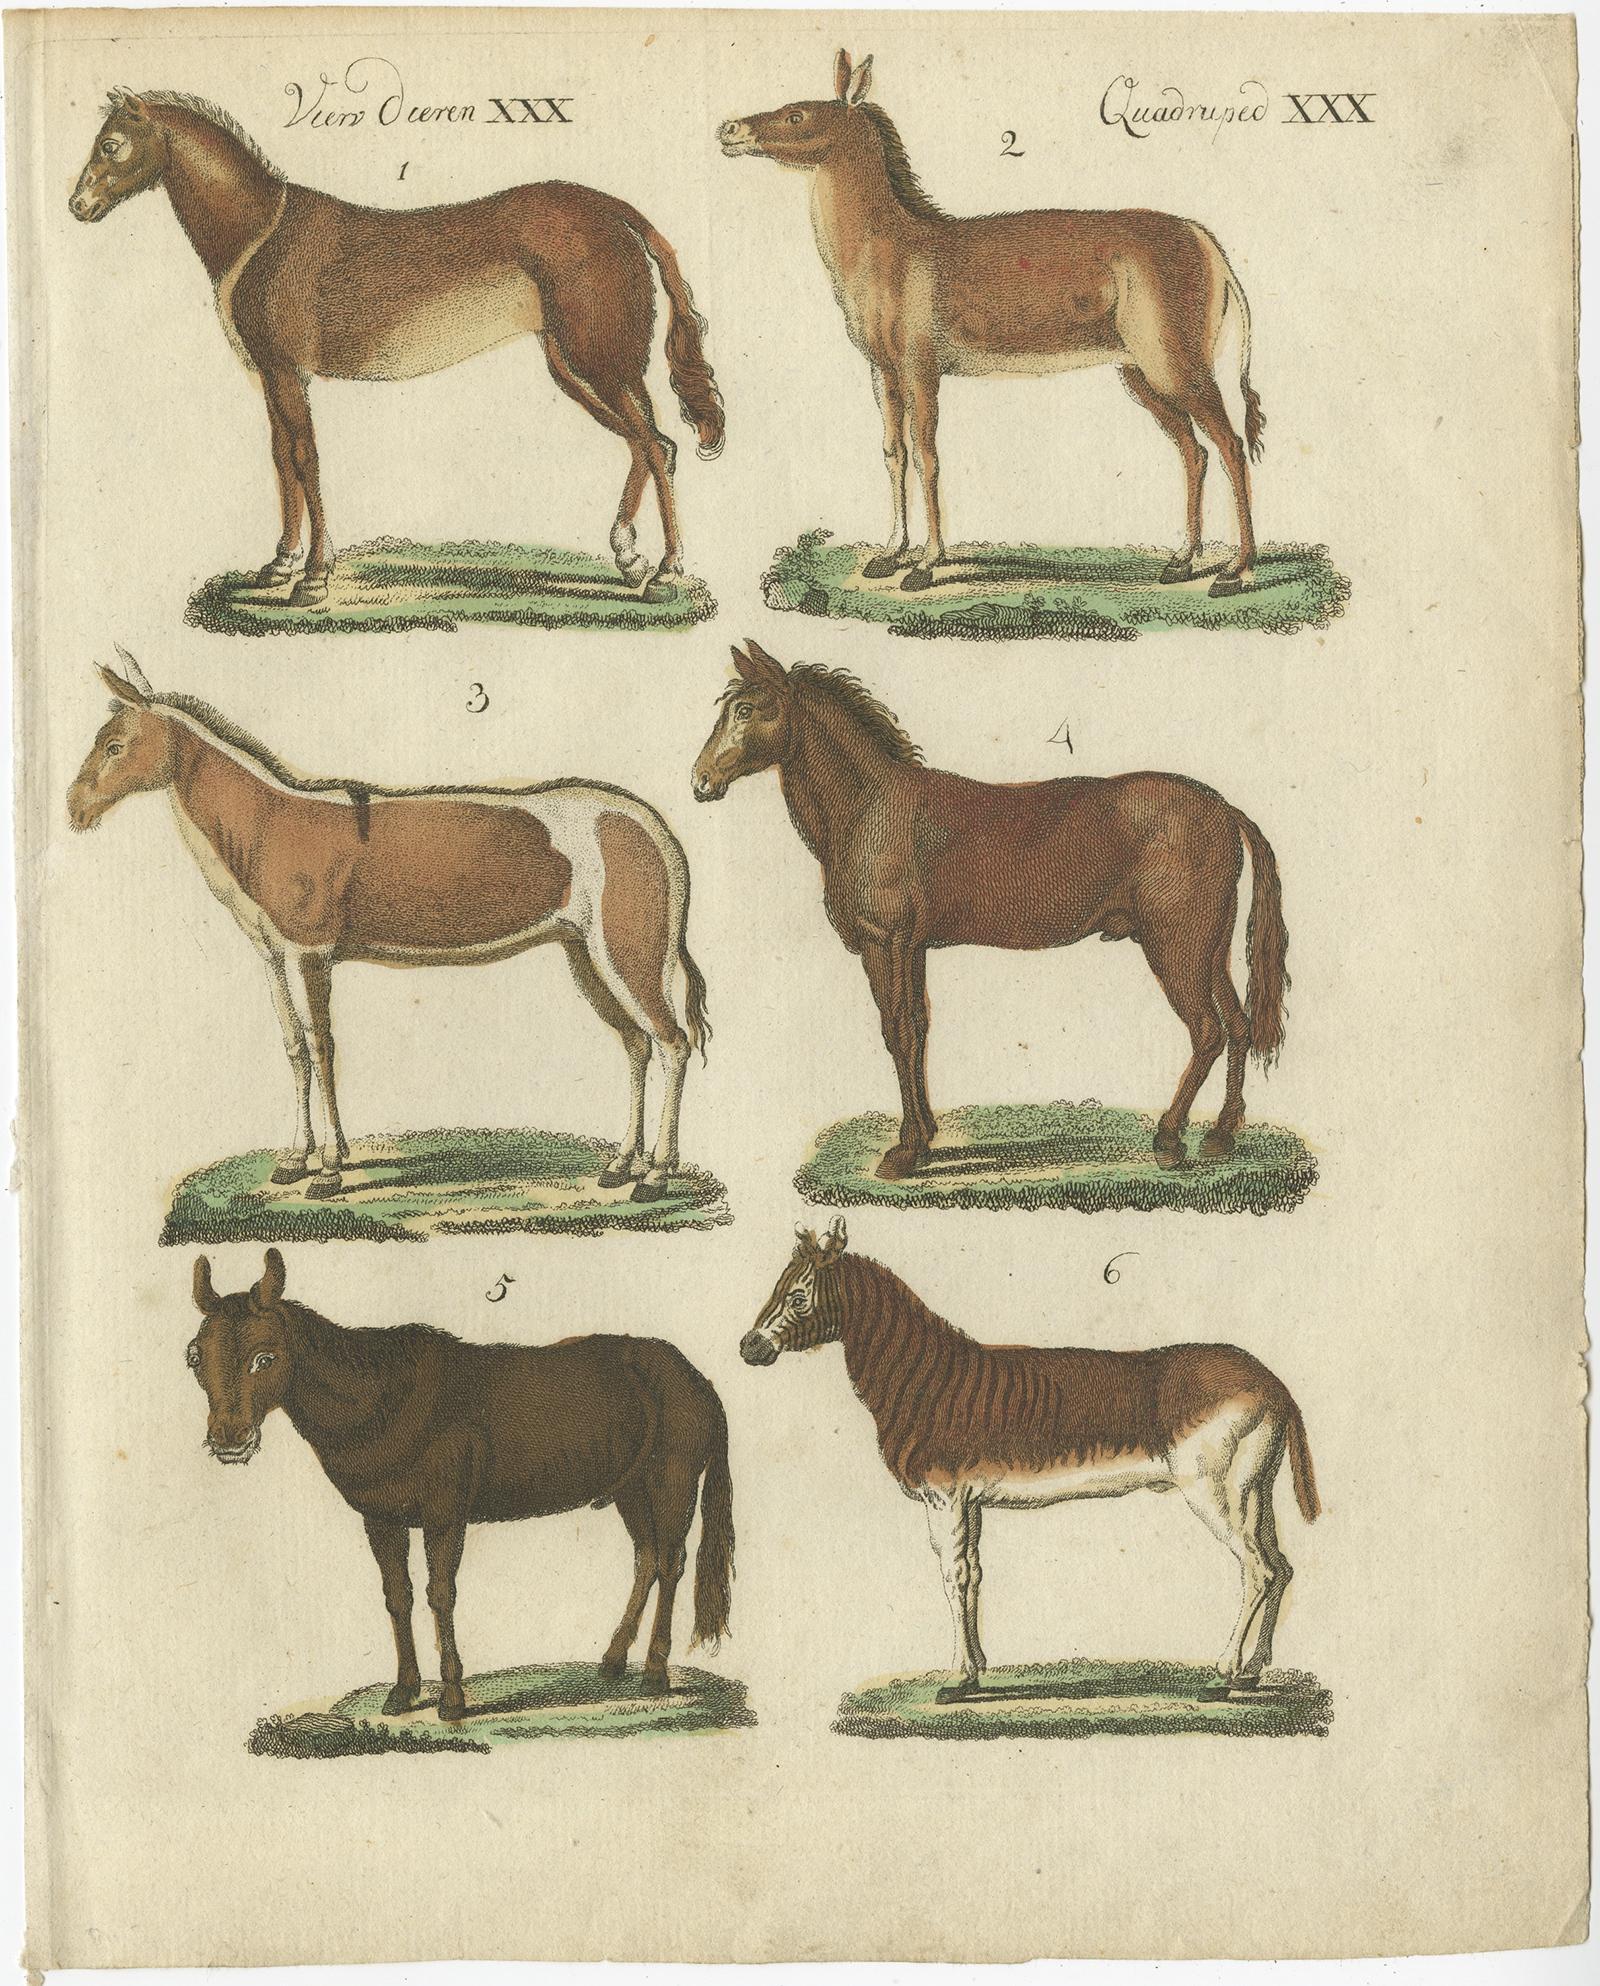 Antique print titled 'Vierv. Dieren XXX, Quadruped XXX'. 

This animal print depicts 1. Wilde paard, 2. Wilde halfezel, 3. Woud-Ezel, 4. Muildier, 5. Muilezel, 6. Quagga (horses/donkeys). This engraved print originates from a very rare unknown